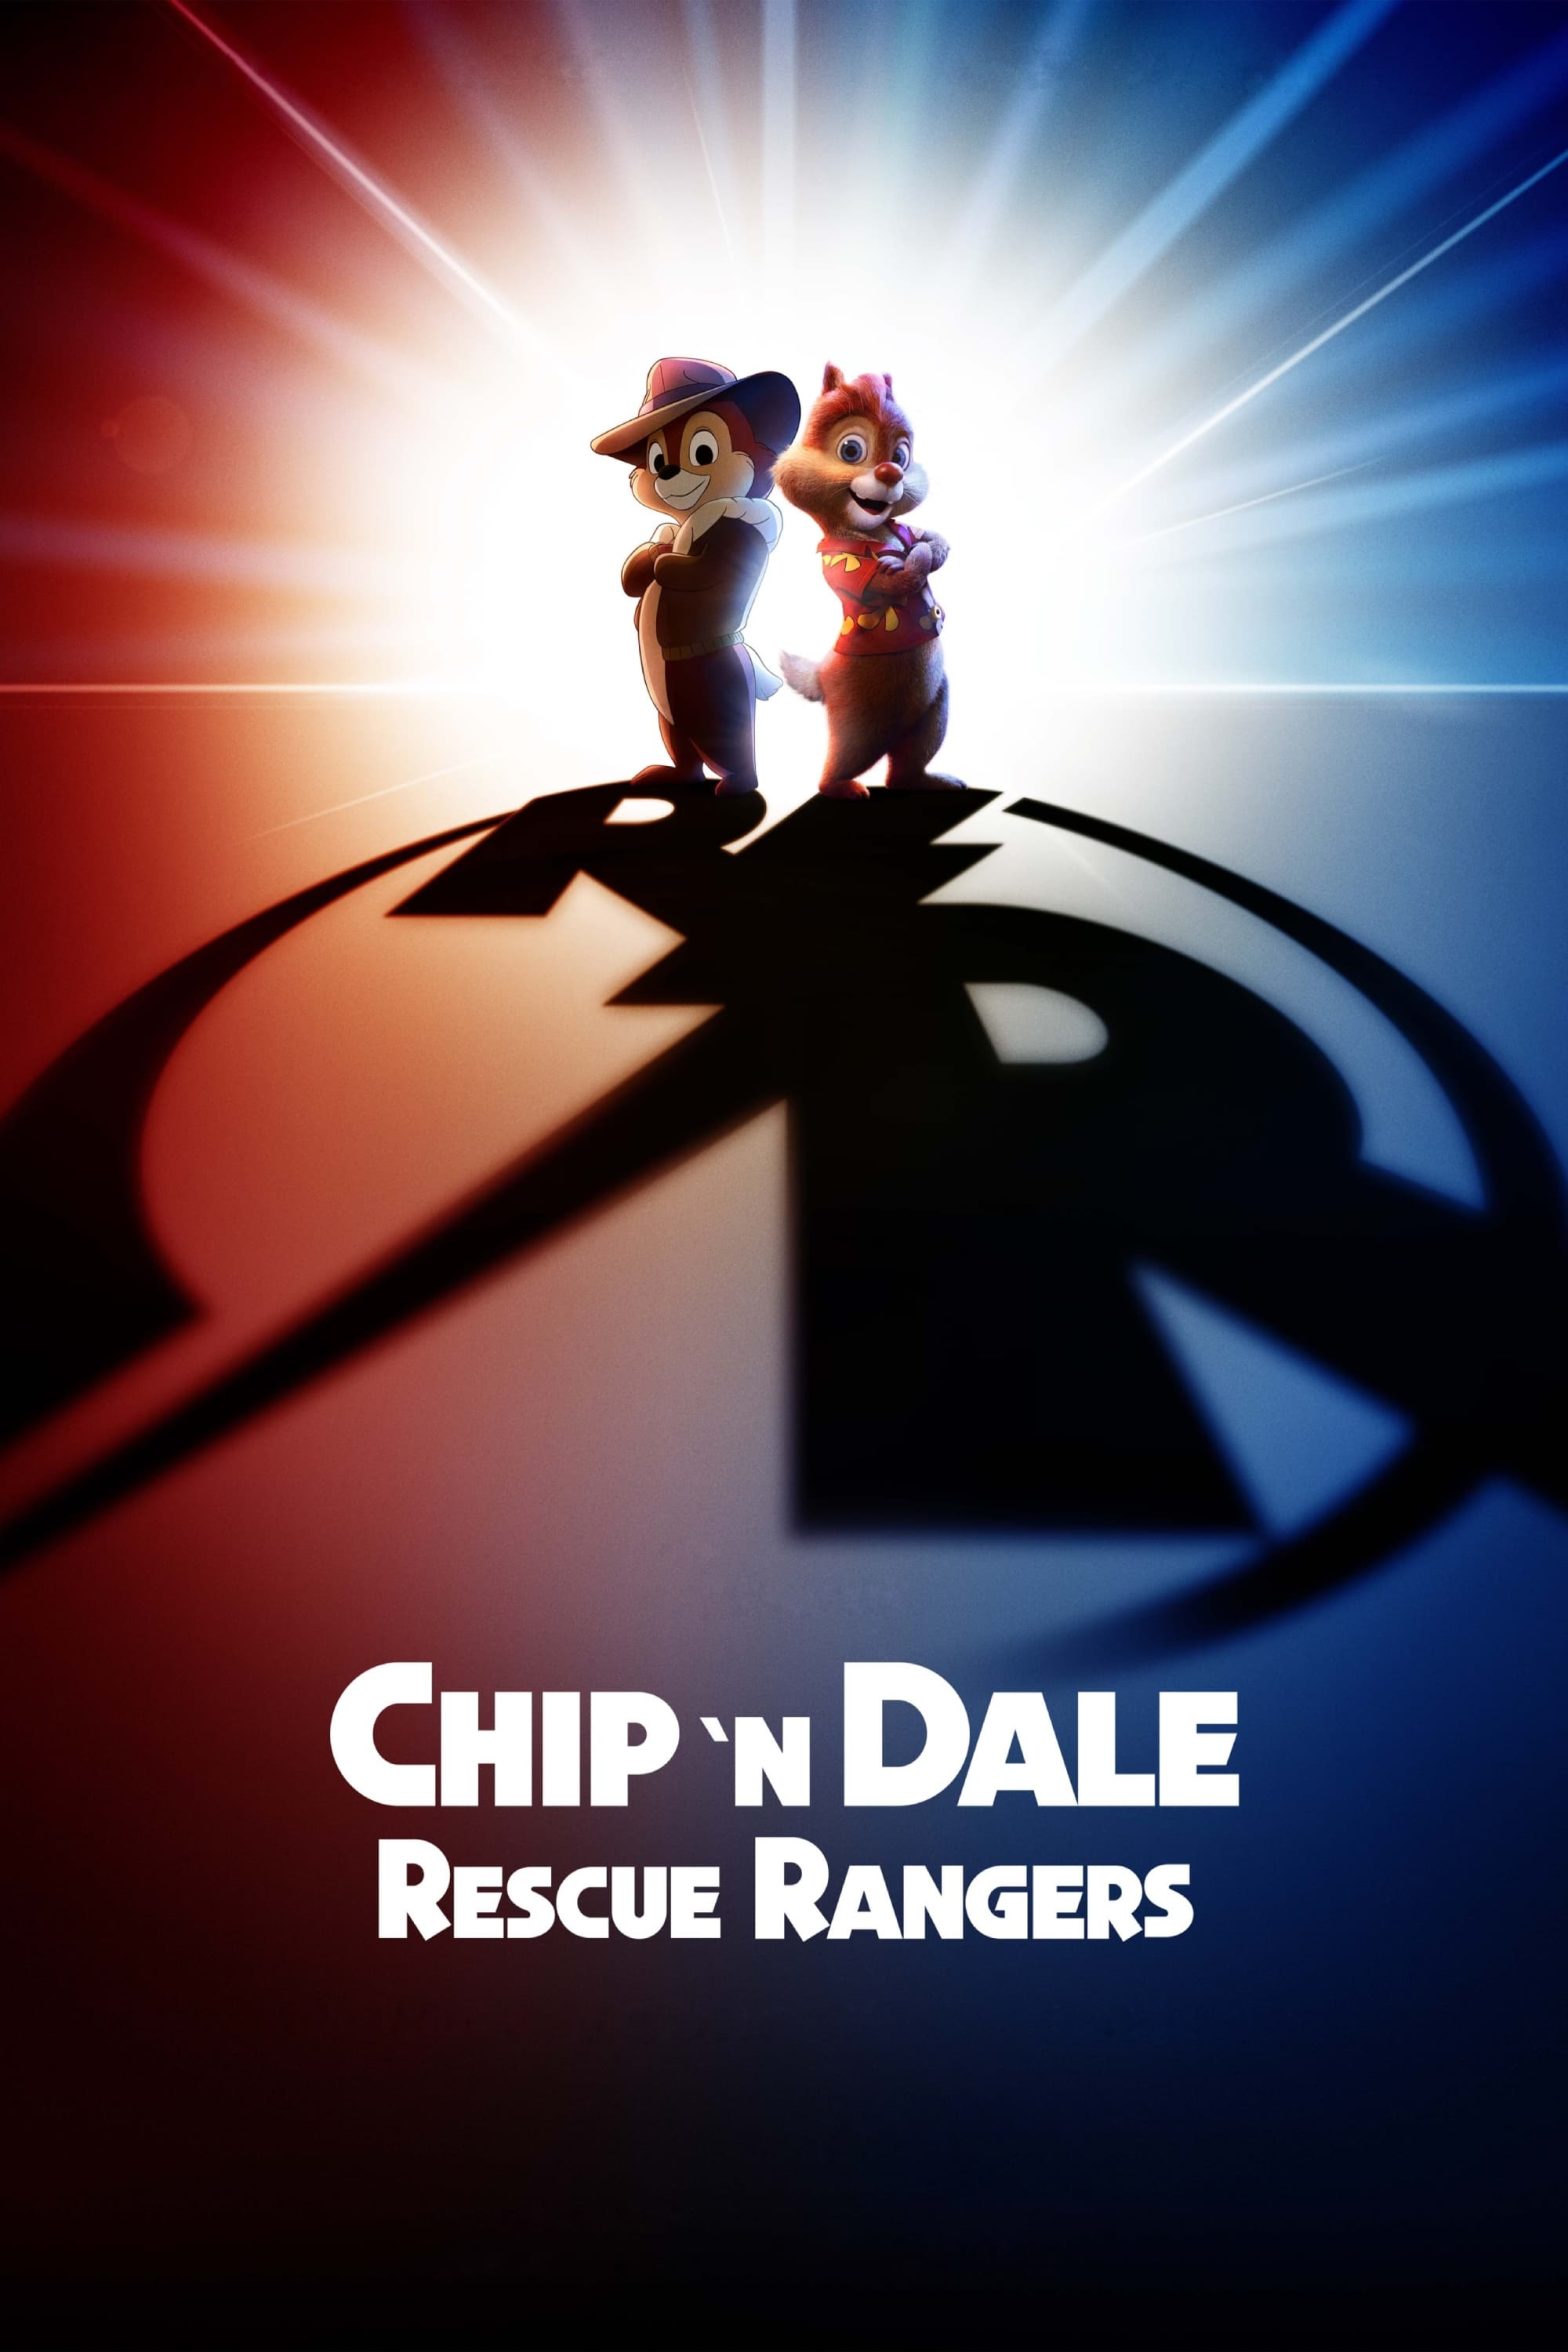 Poster for the movie "Chip 'n Dale: Rescue Rangers"